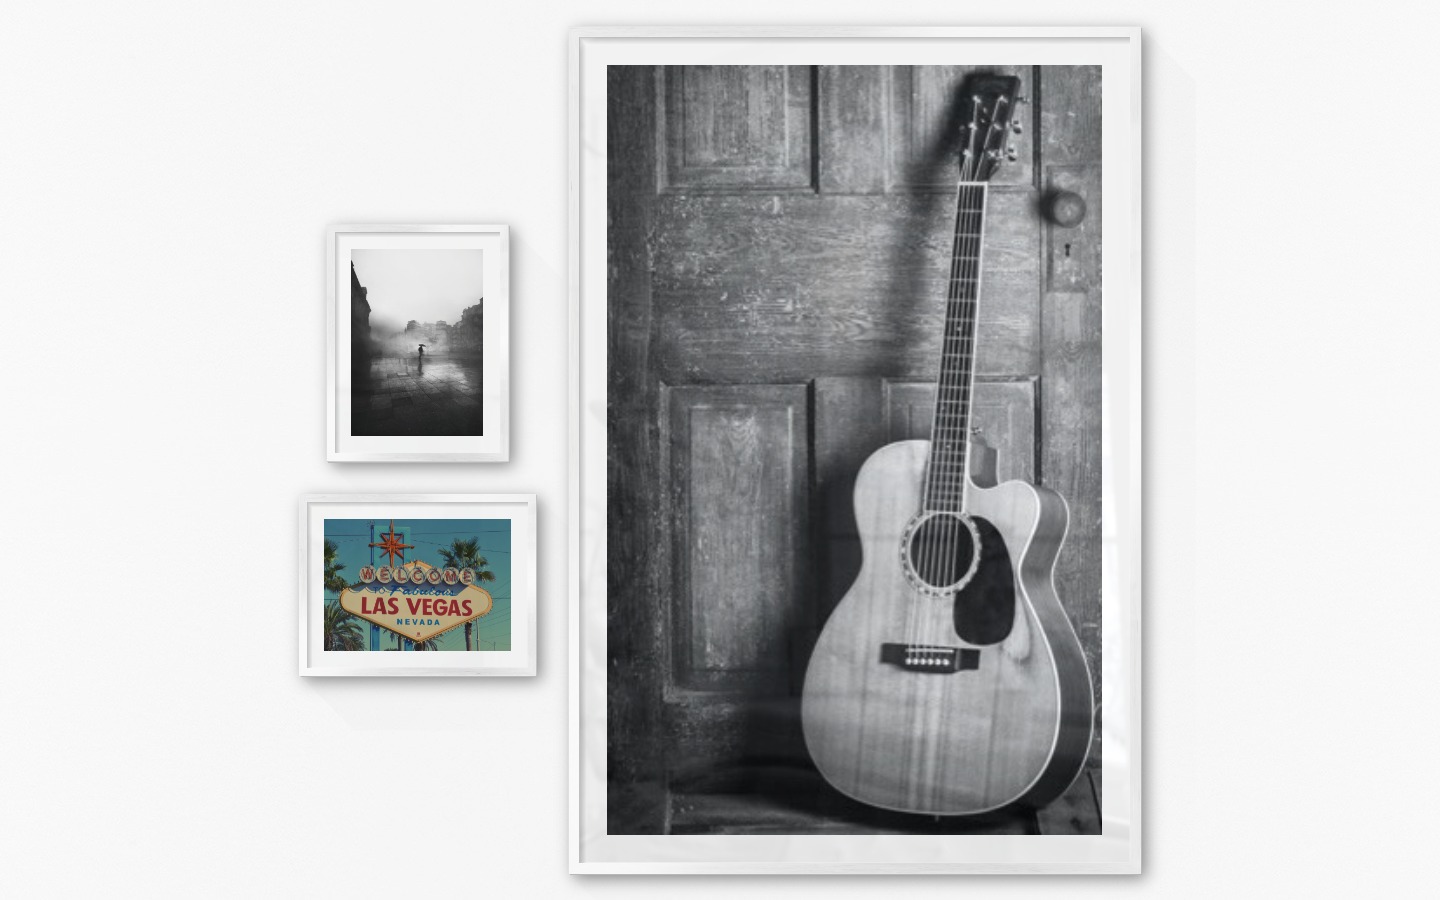 Gallery wall with picture frames in silver in sizes 30x40 and 100x150 with prints "Rainy city", "Las Vegas sign" and "Guitar"